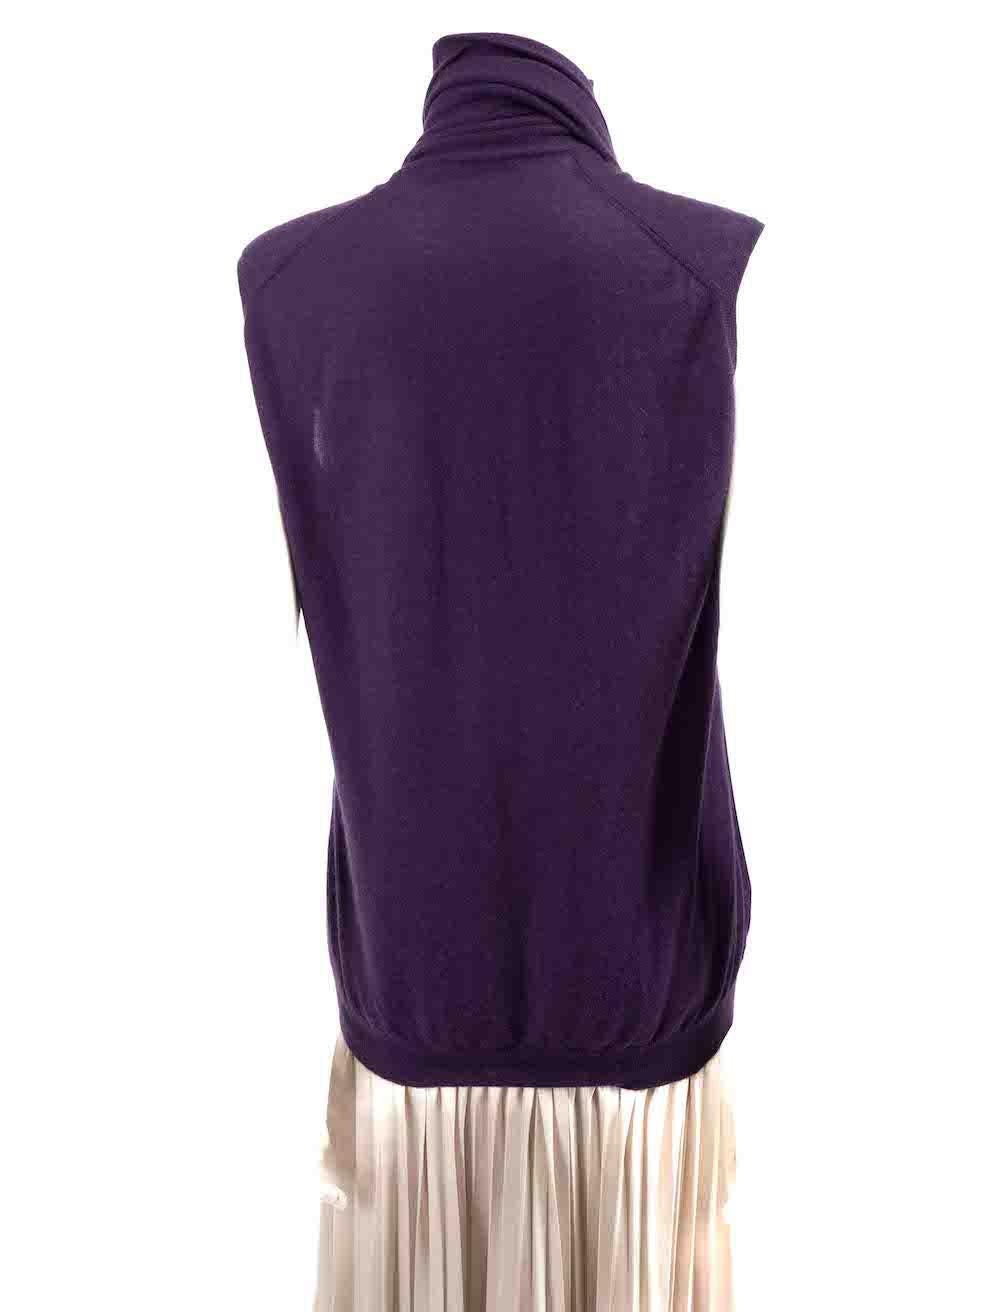 Balenciaga Purple Cashmere Sleeveless Scarf Top Size M In Good Condition For Sale In London, GB